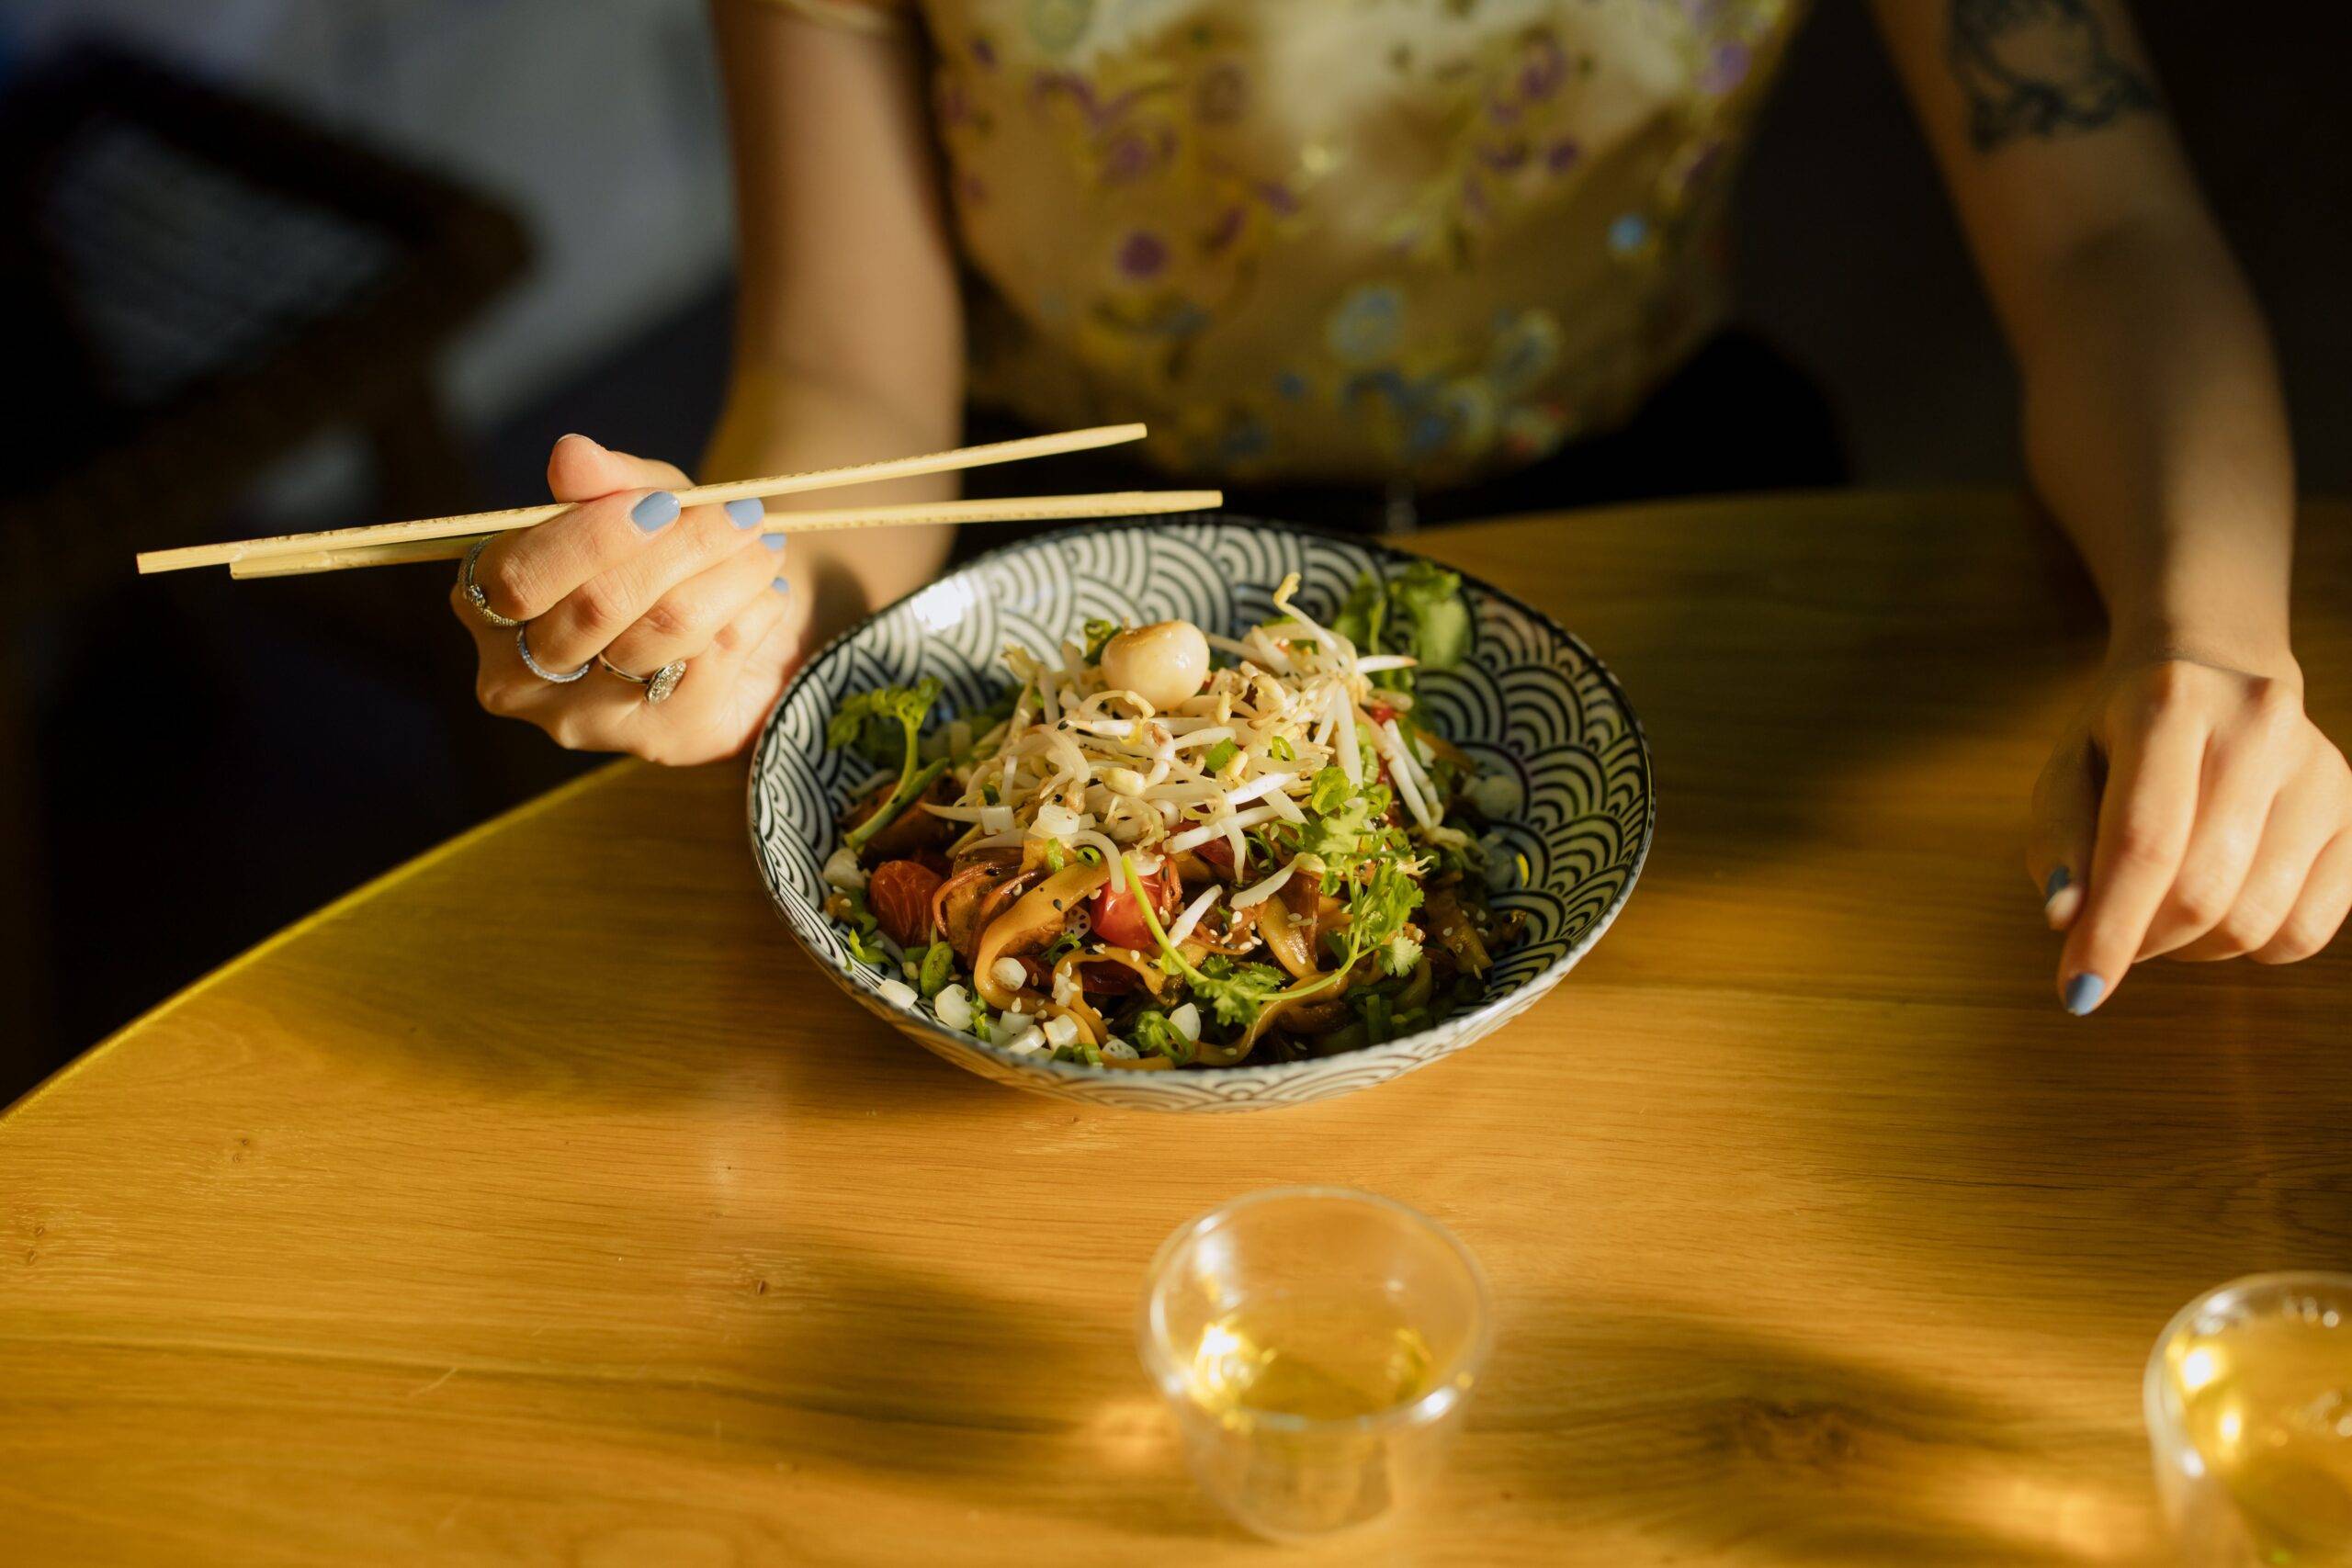 The Best Chinese Cuisine For Gluten-Free Diets